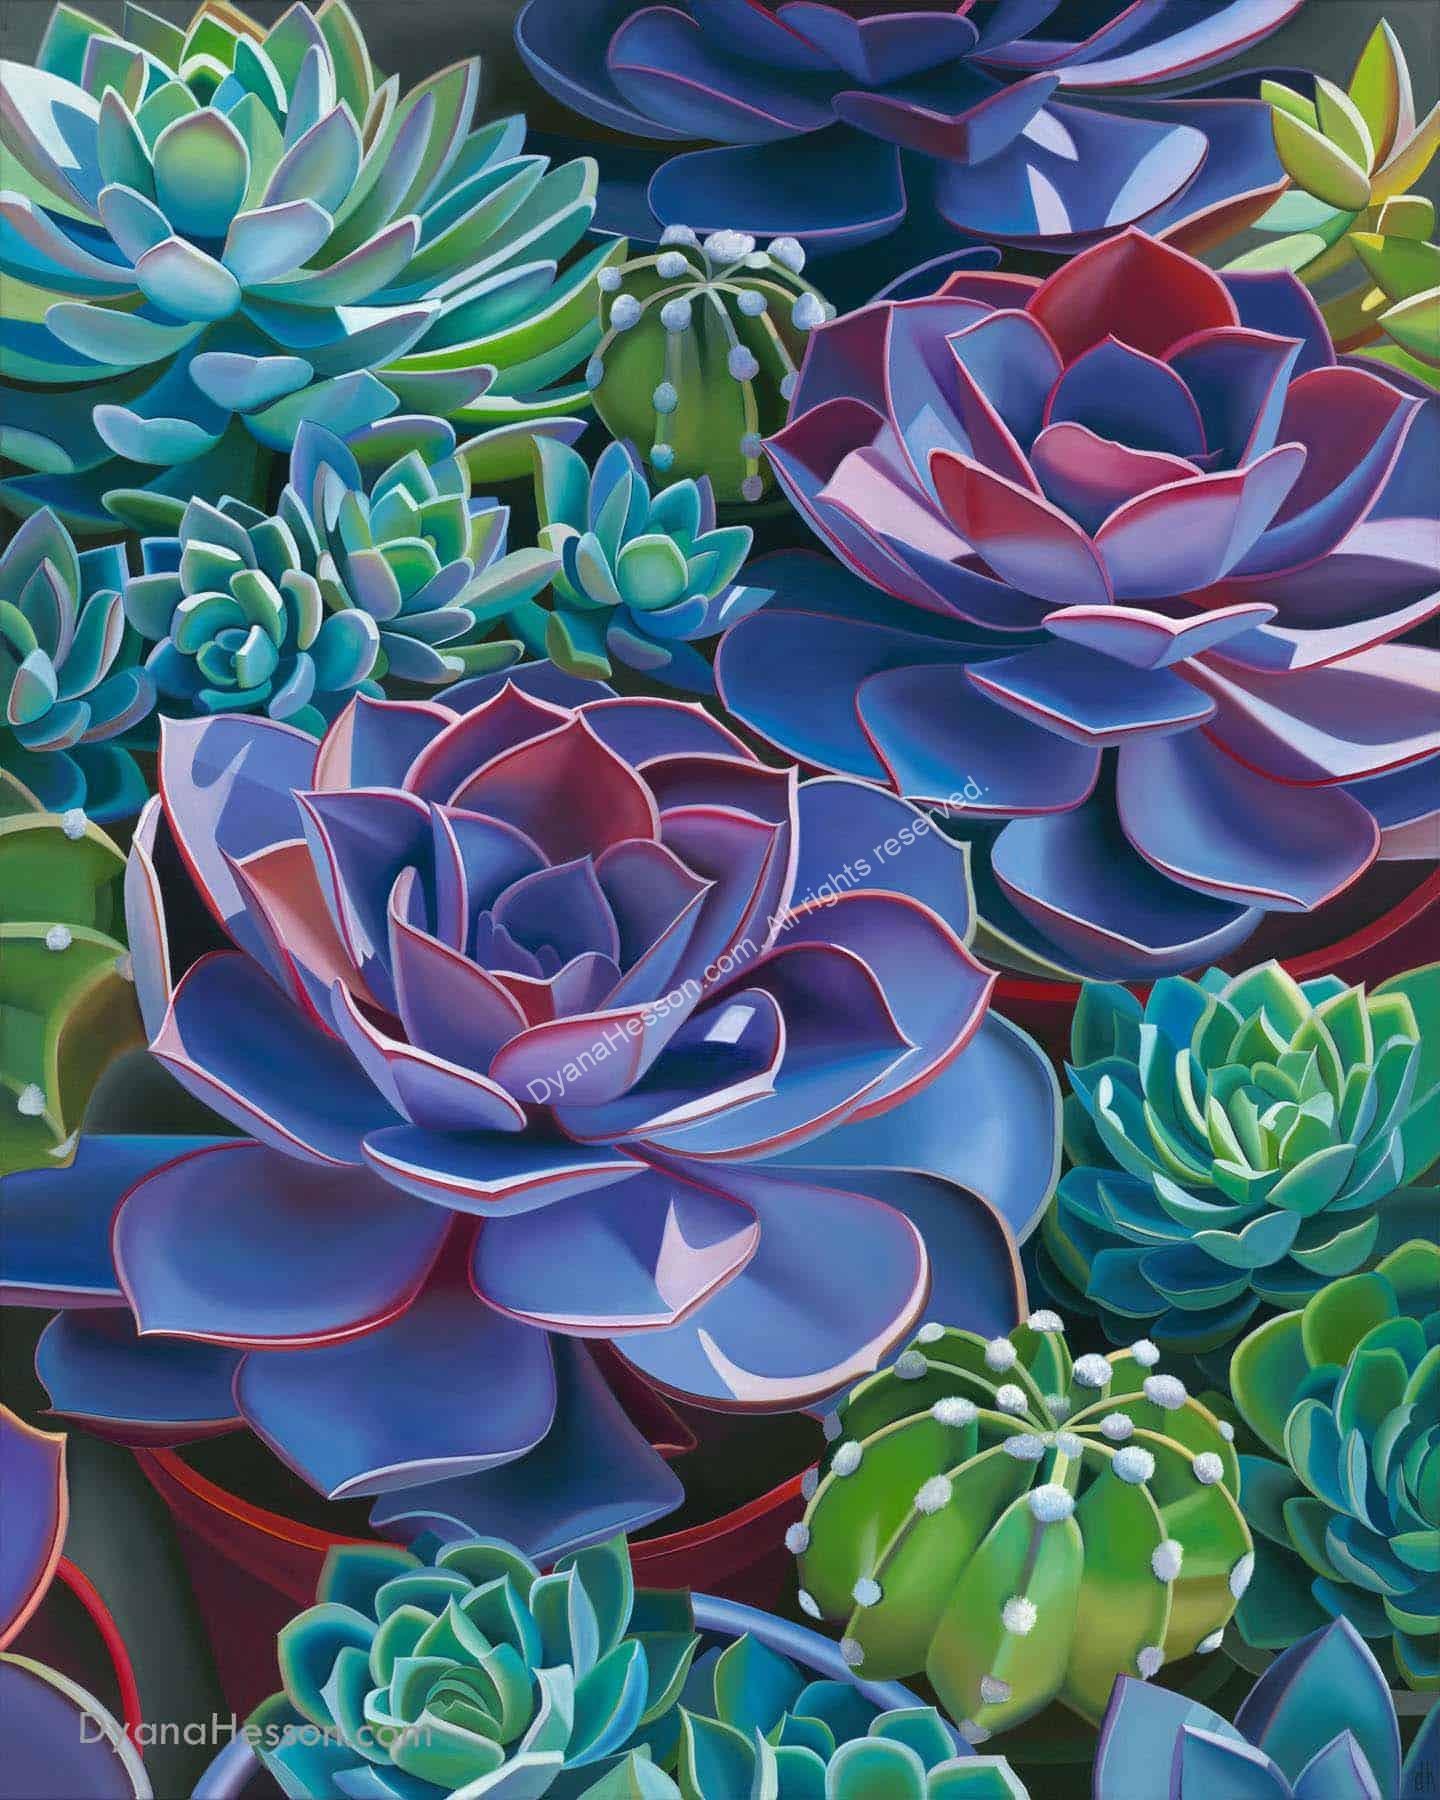 Affinity Succulents In Pots 48x38 Dyana Hesson 